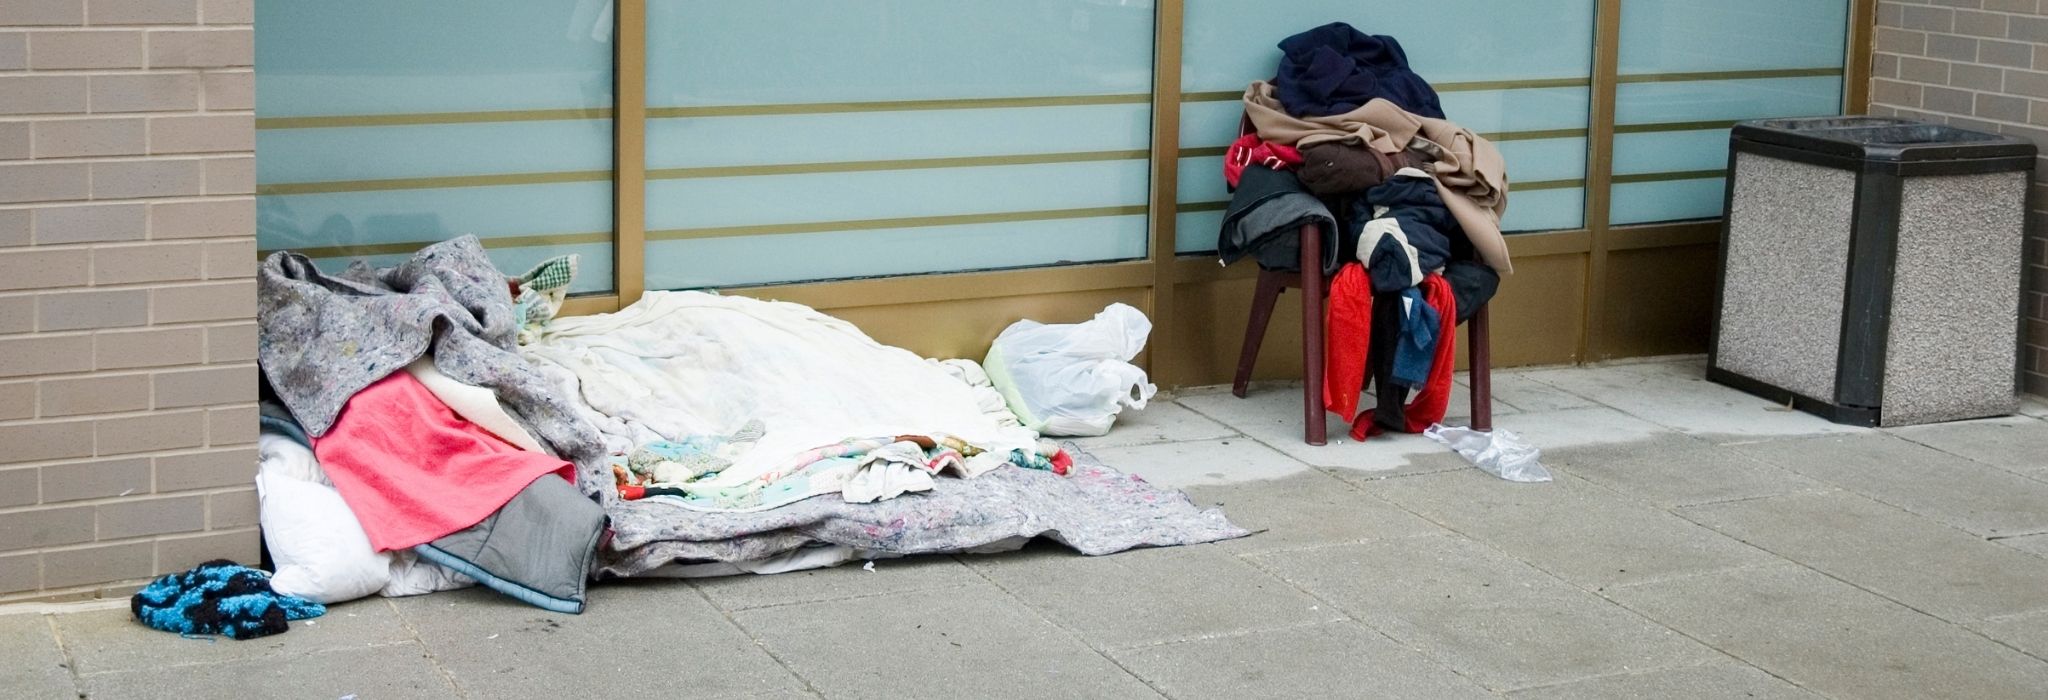 rediCASE Case Management supports Homeless Service Providers